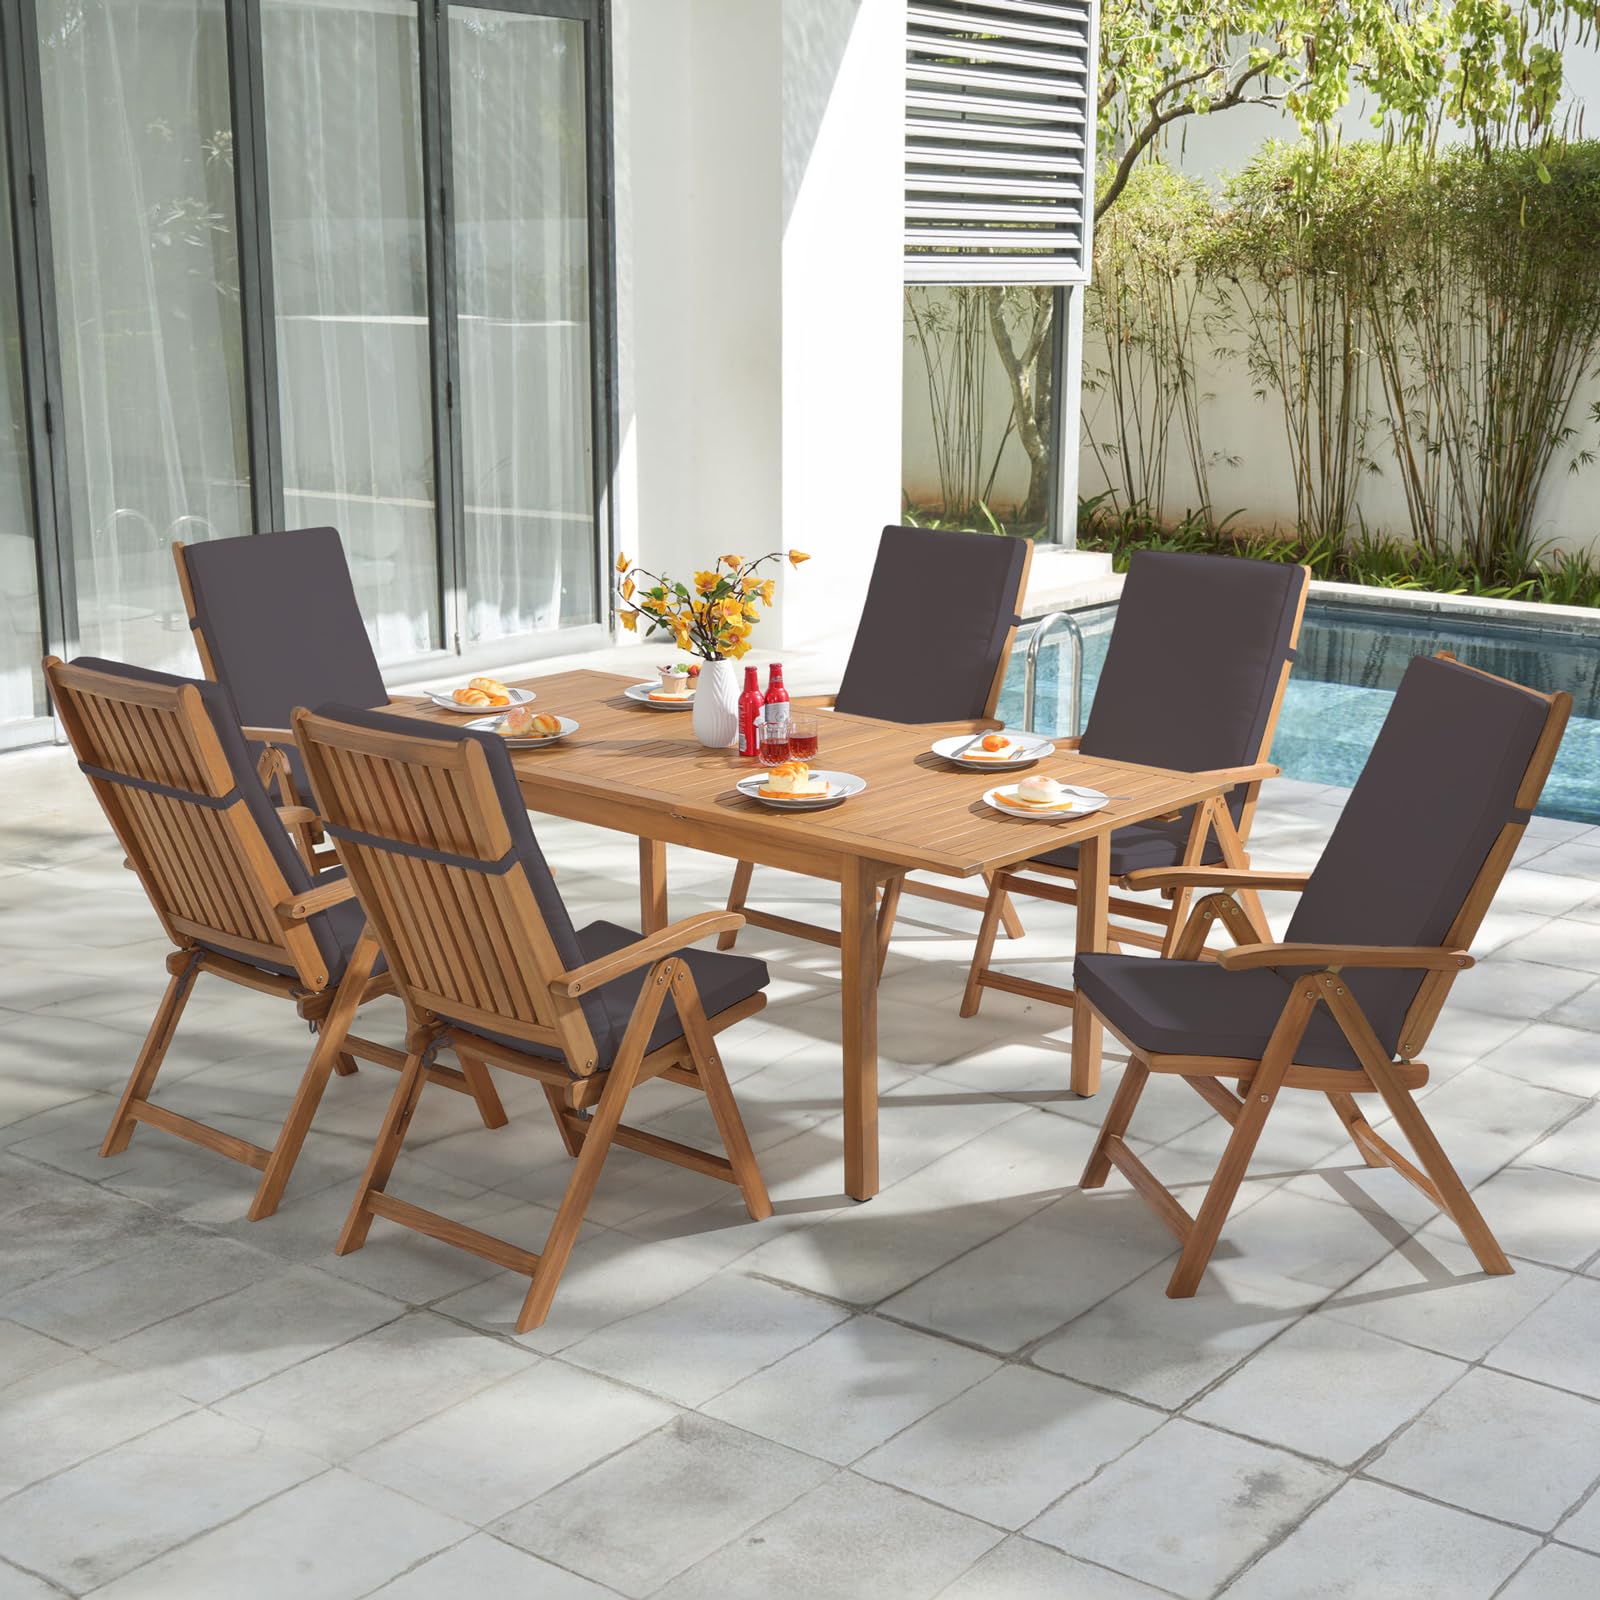 7 pcs Outdoor FSC Certified Acacia Wood Dining Set, 6 Foldable Reclining Chair and Extendable Dining Table